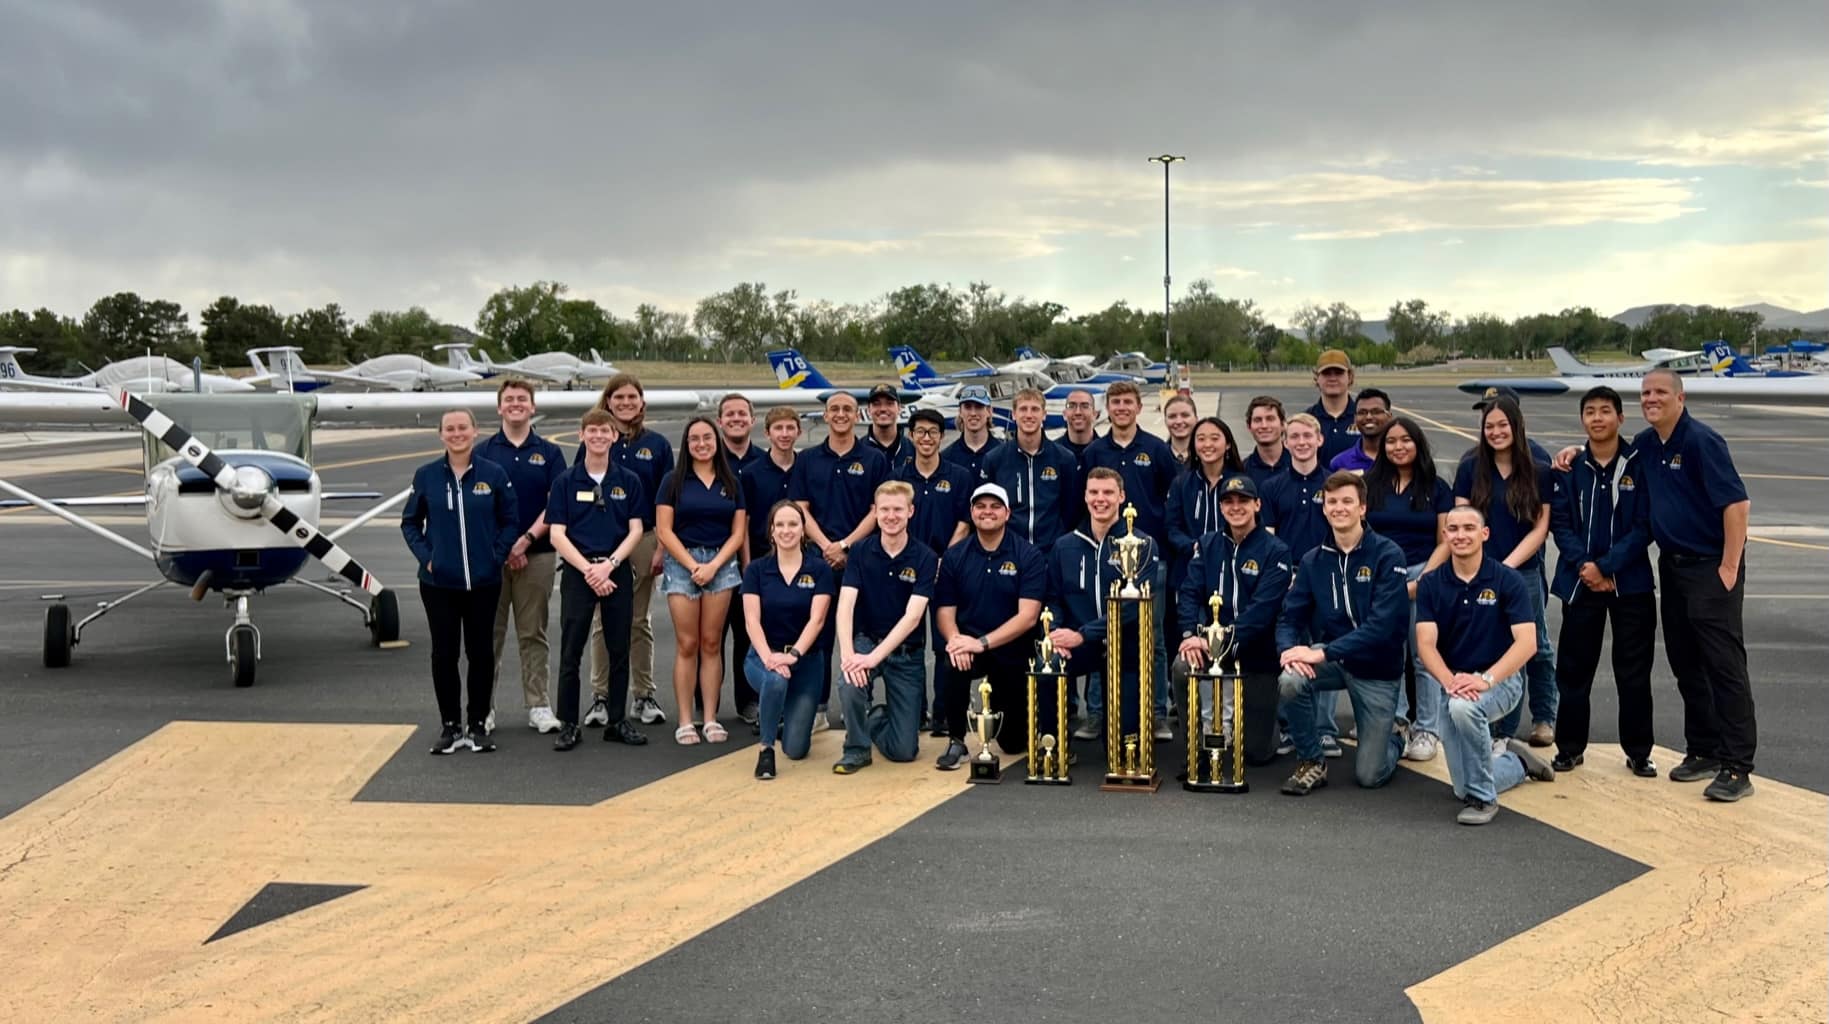 Embry-Riddle’s Golden Eagles Flight Team brought home first-place gold from the 2023 National Intercollegiate Flying Association’s (NIFA) Safety and Flight Evaluation Conference, tallying the team’s third consecutive championship and 15th overall.